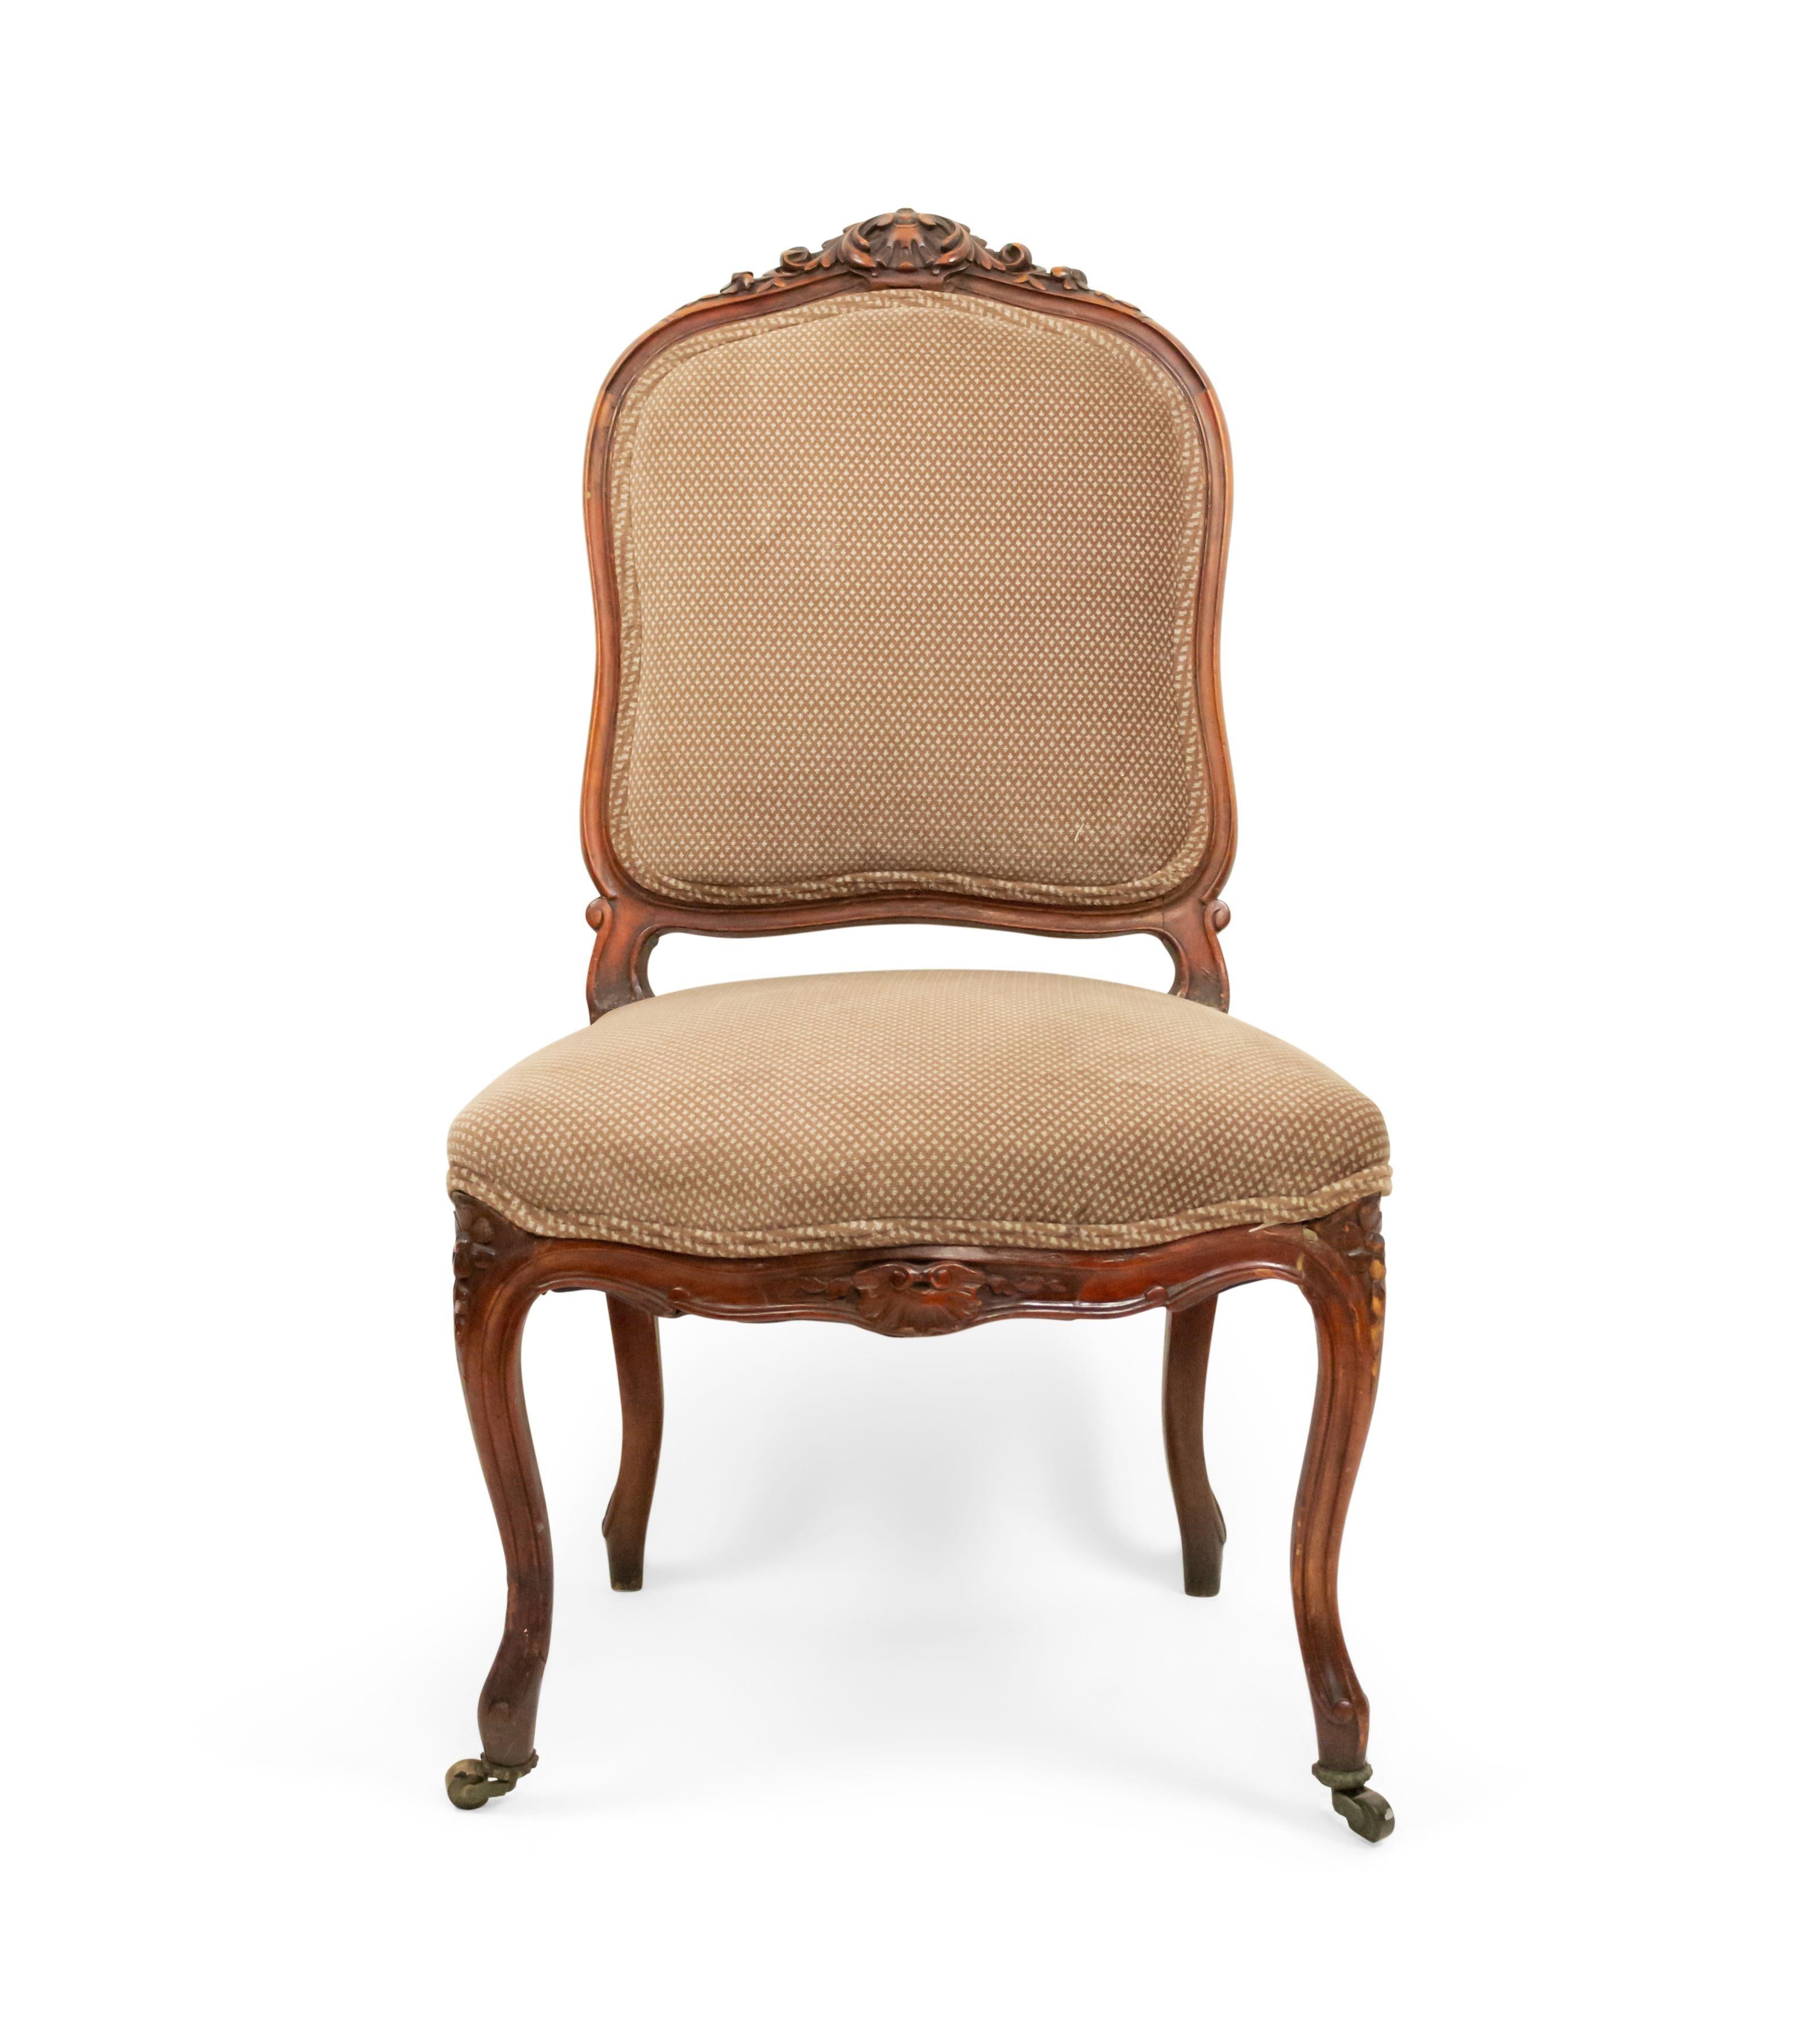 Pair of 19th century French Louis XV style walnut side chairs with a carved back crest and brown upholstered seat and back (1 leg as is).